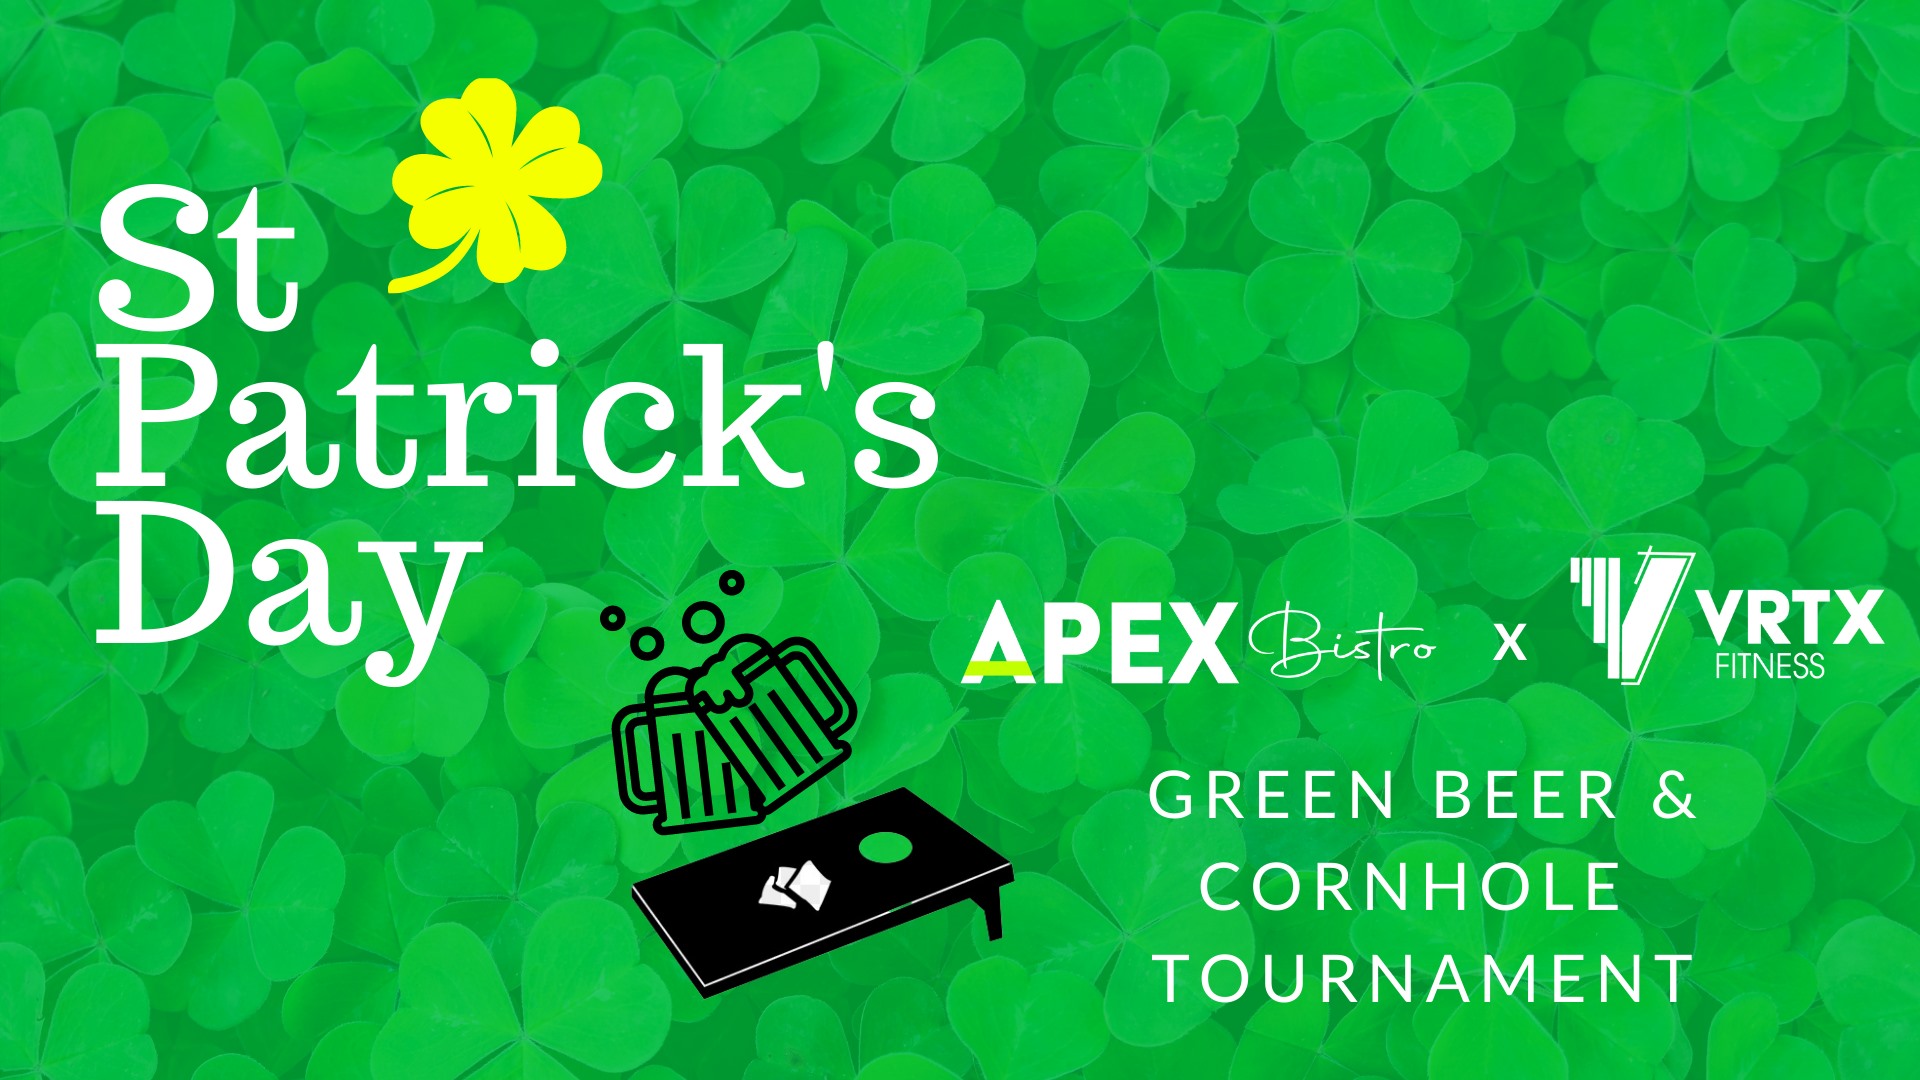 Green Beer & Cornhole Tournament at VRTS on St. Patrick's Day